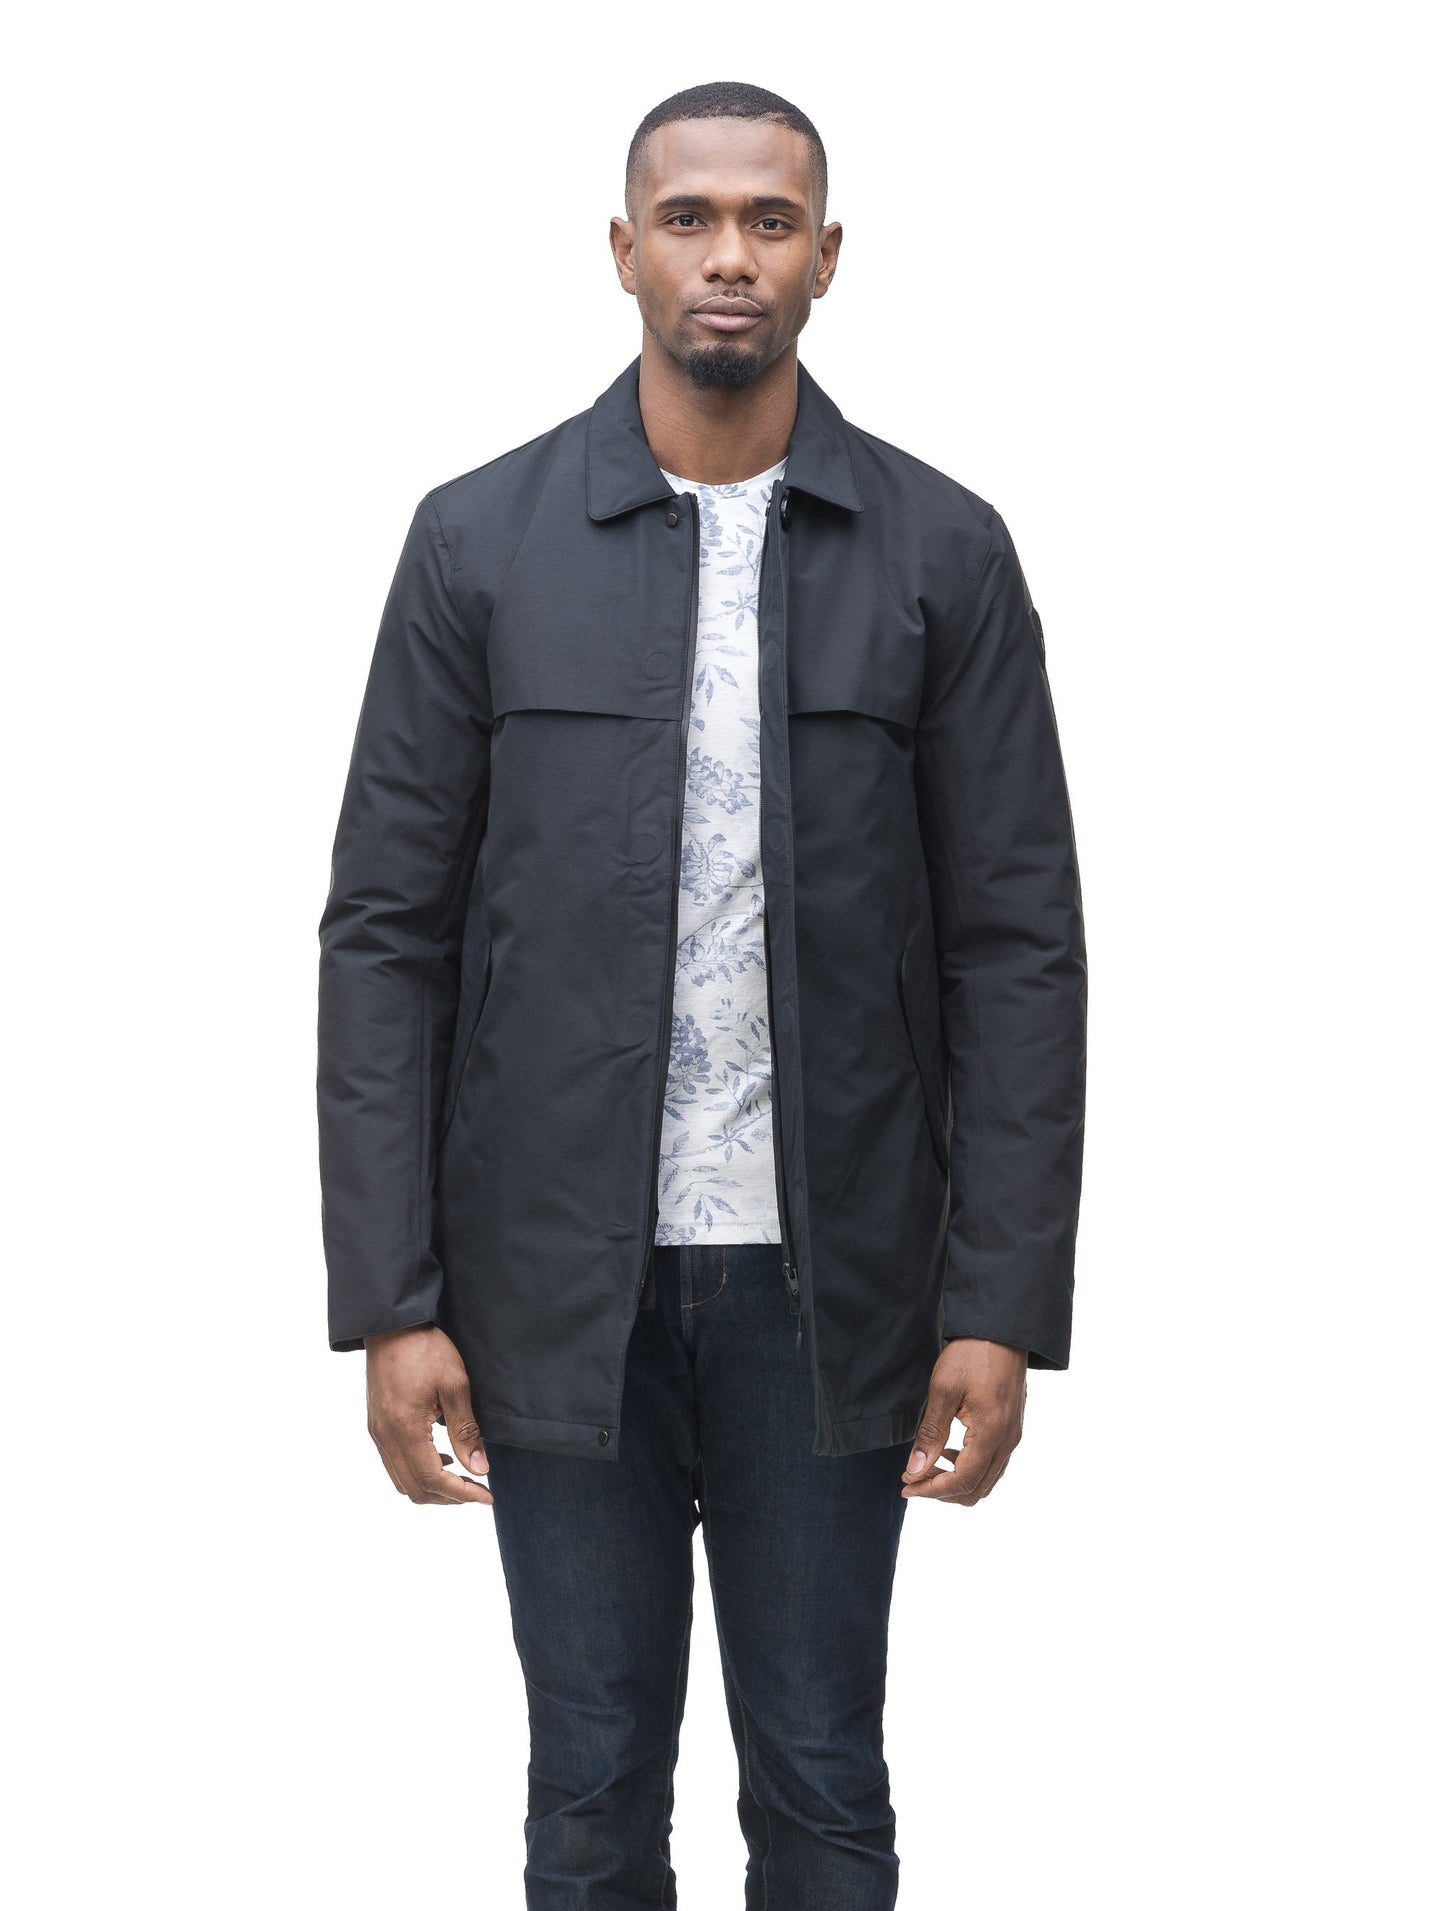 Men's waist length raincoat with a magnetic placket and top button detail in Navy